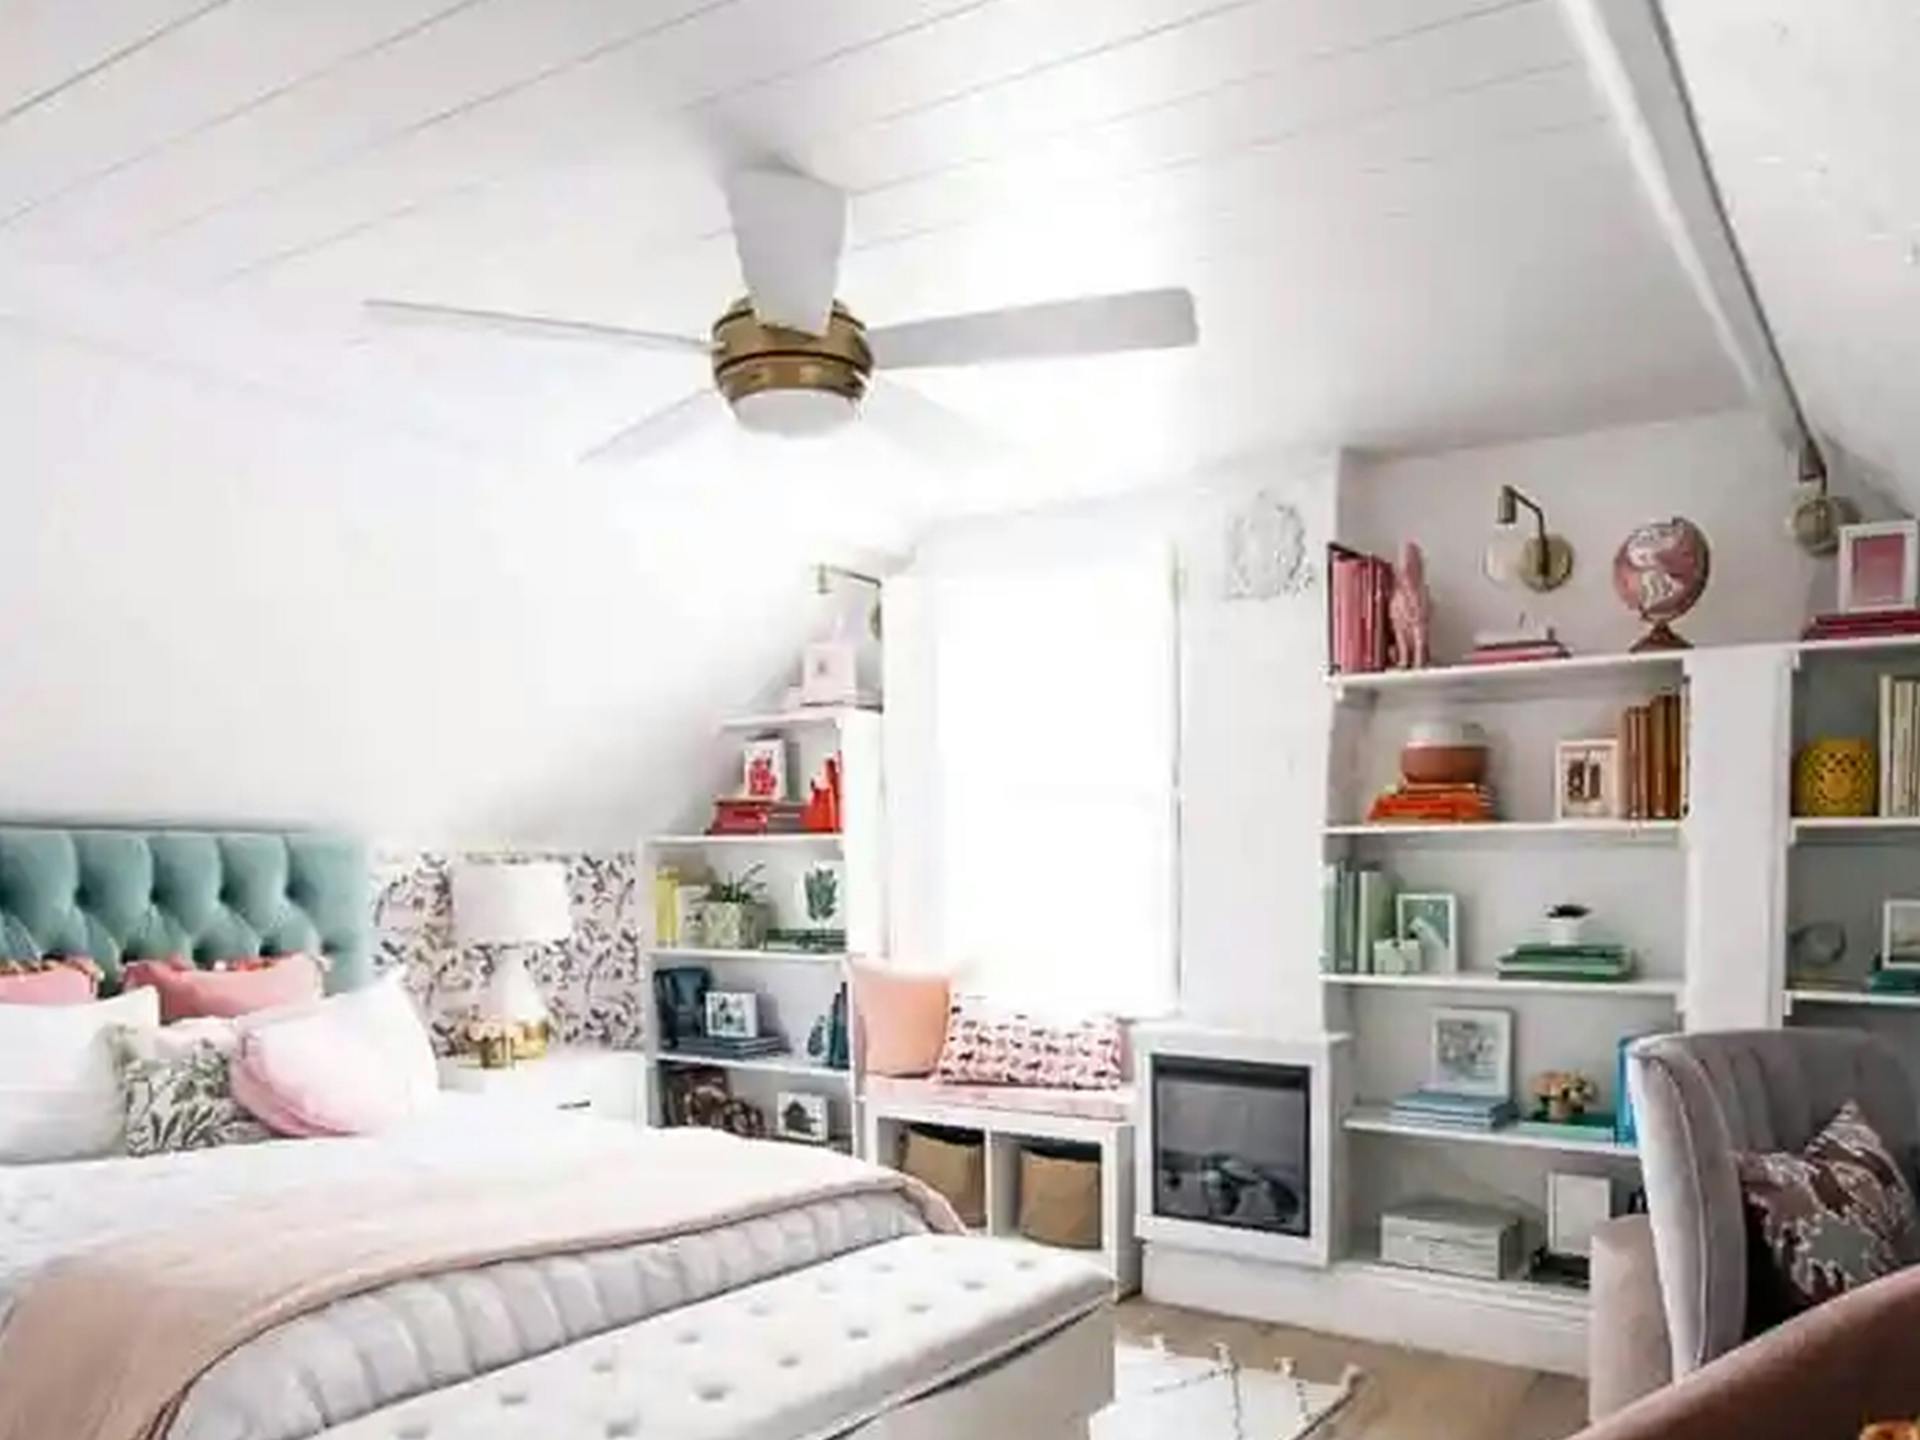 Ashley Wilson's child's colorful bedroom featuring a Kichler ceiling fan